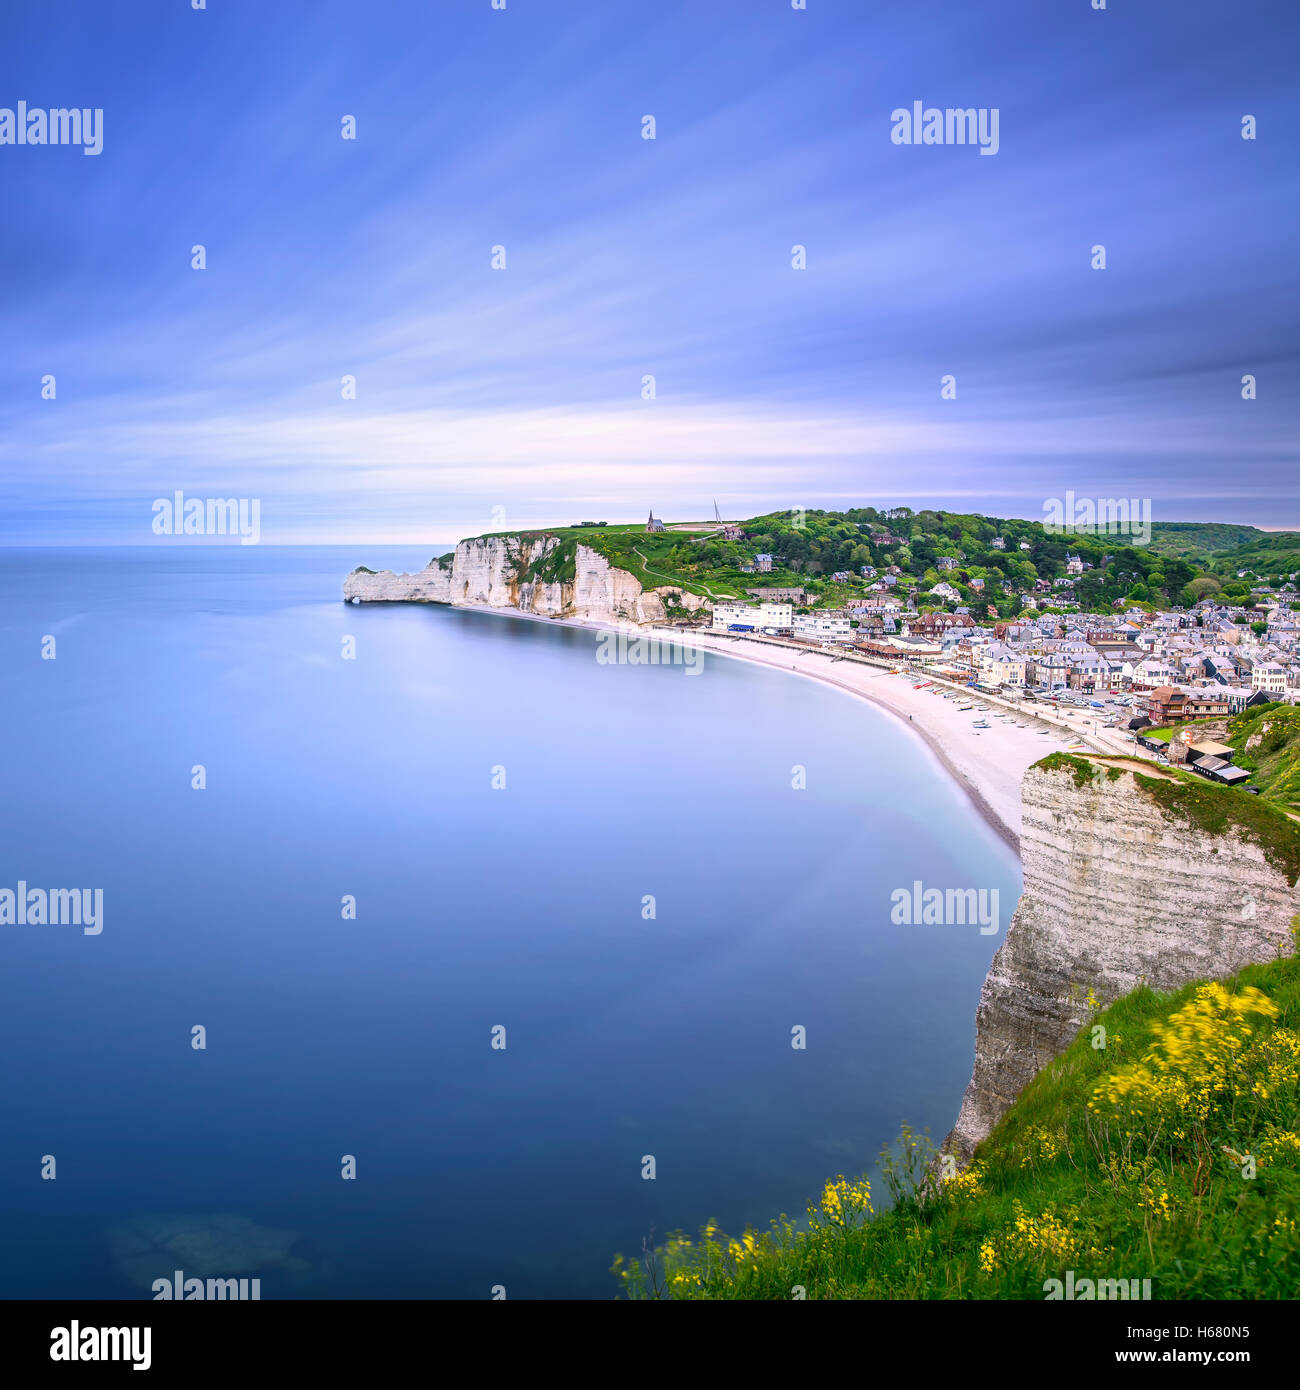 Etretat village and its bay beach, aerial view from cliff. Normandy, France, Europe. Long exposure photography Stock Photo